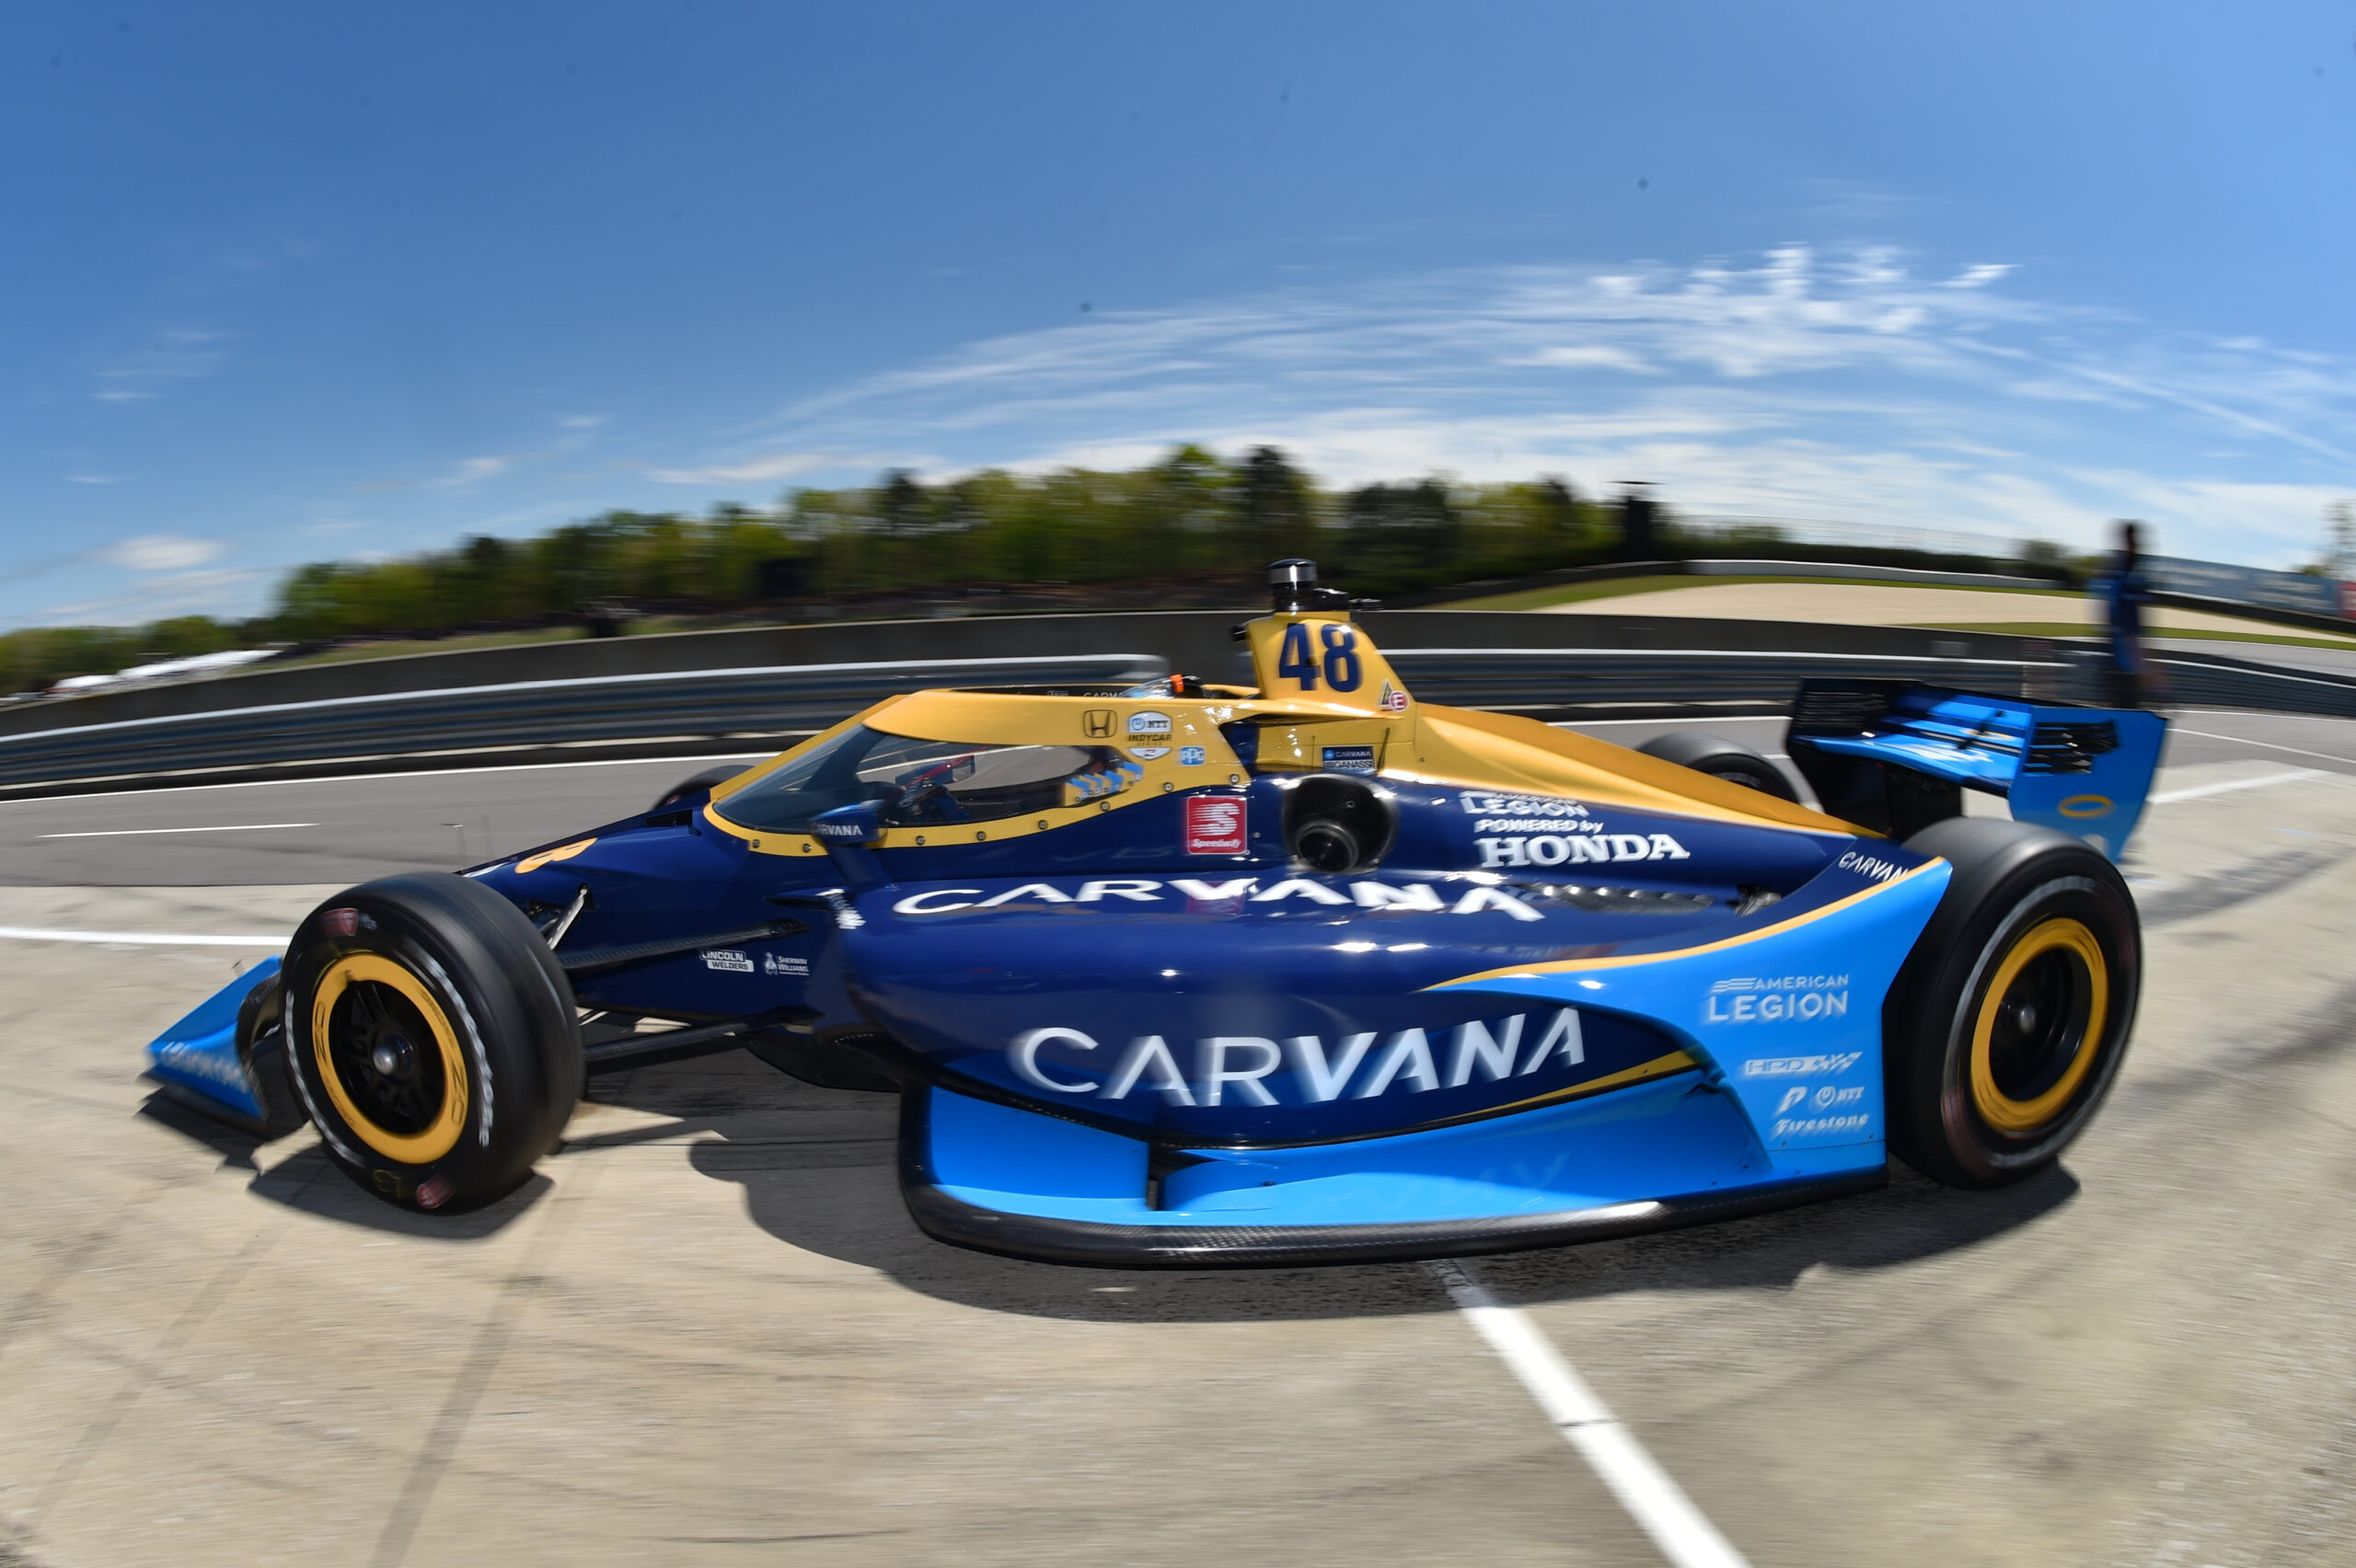 Significantly, Johnson's No. 48 Carvana Honda proves quite different than his stock car. (Photo: Chris Owens/INDYCAR)